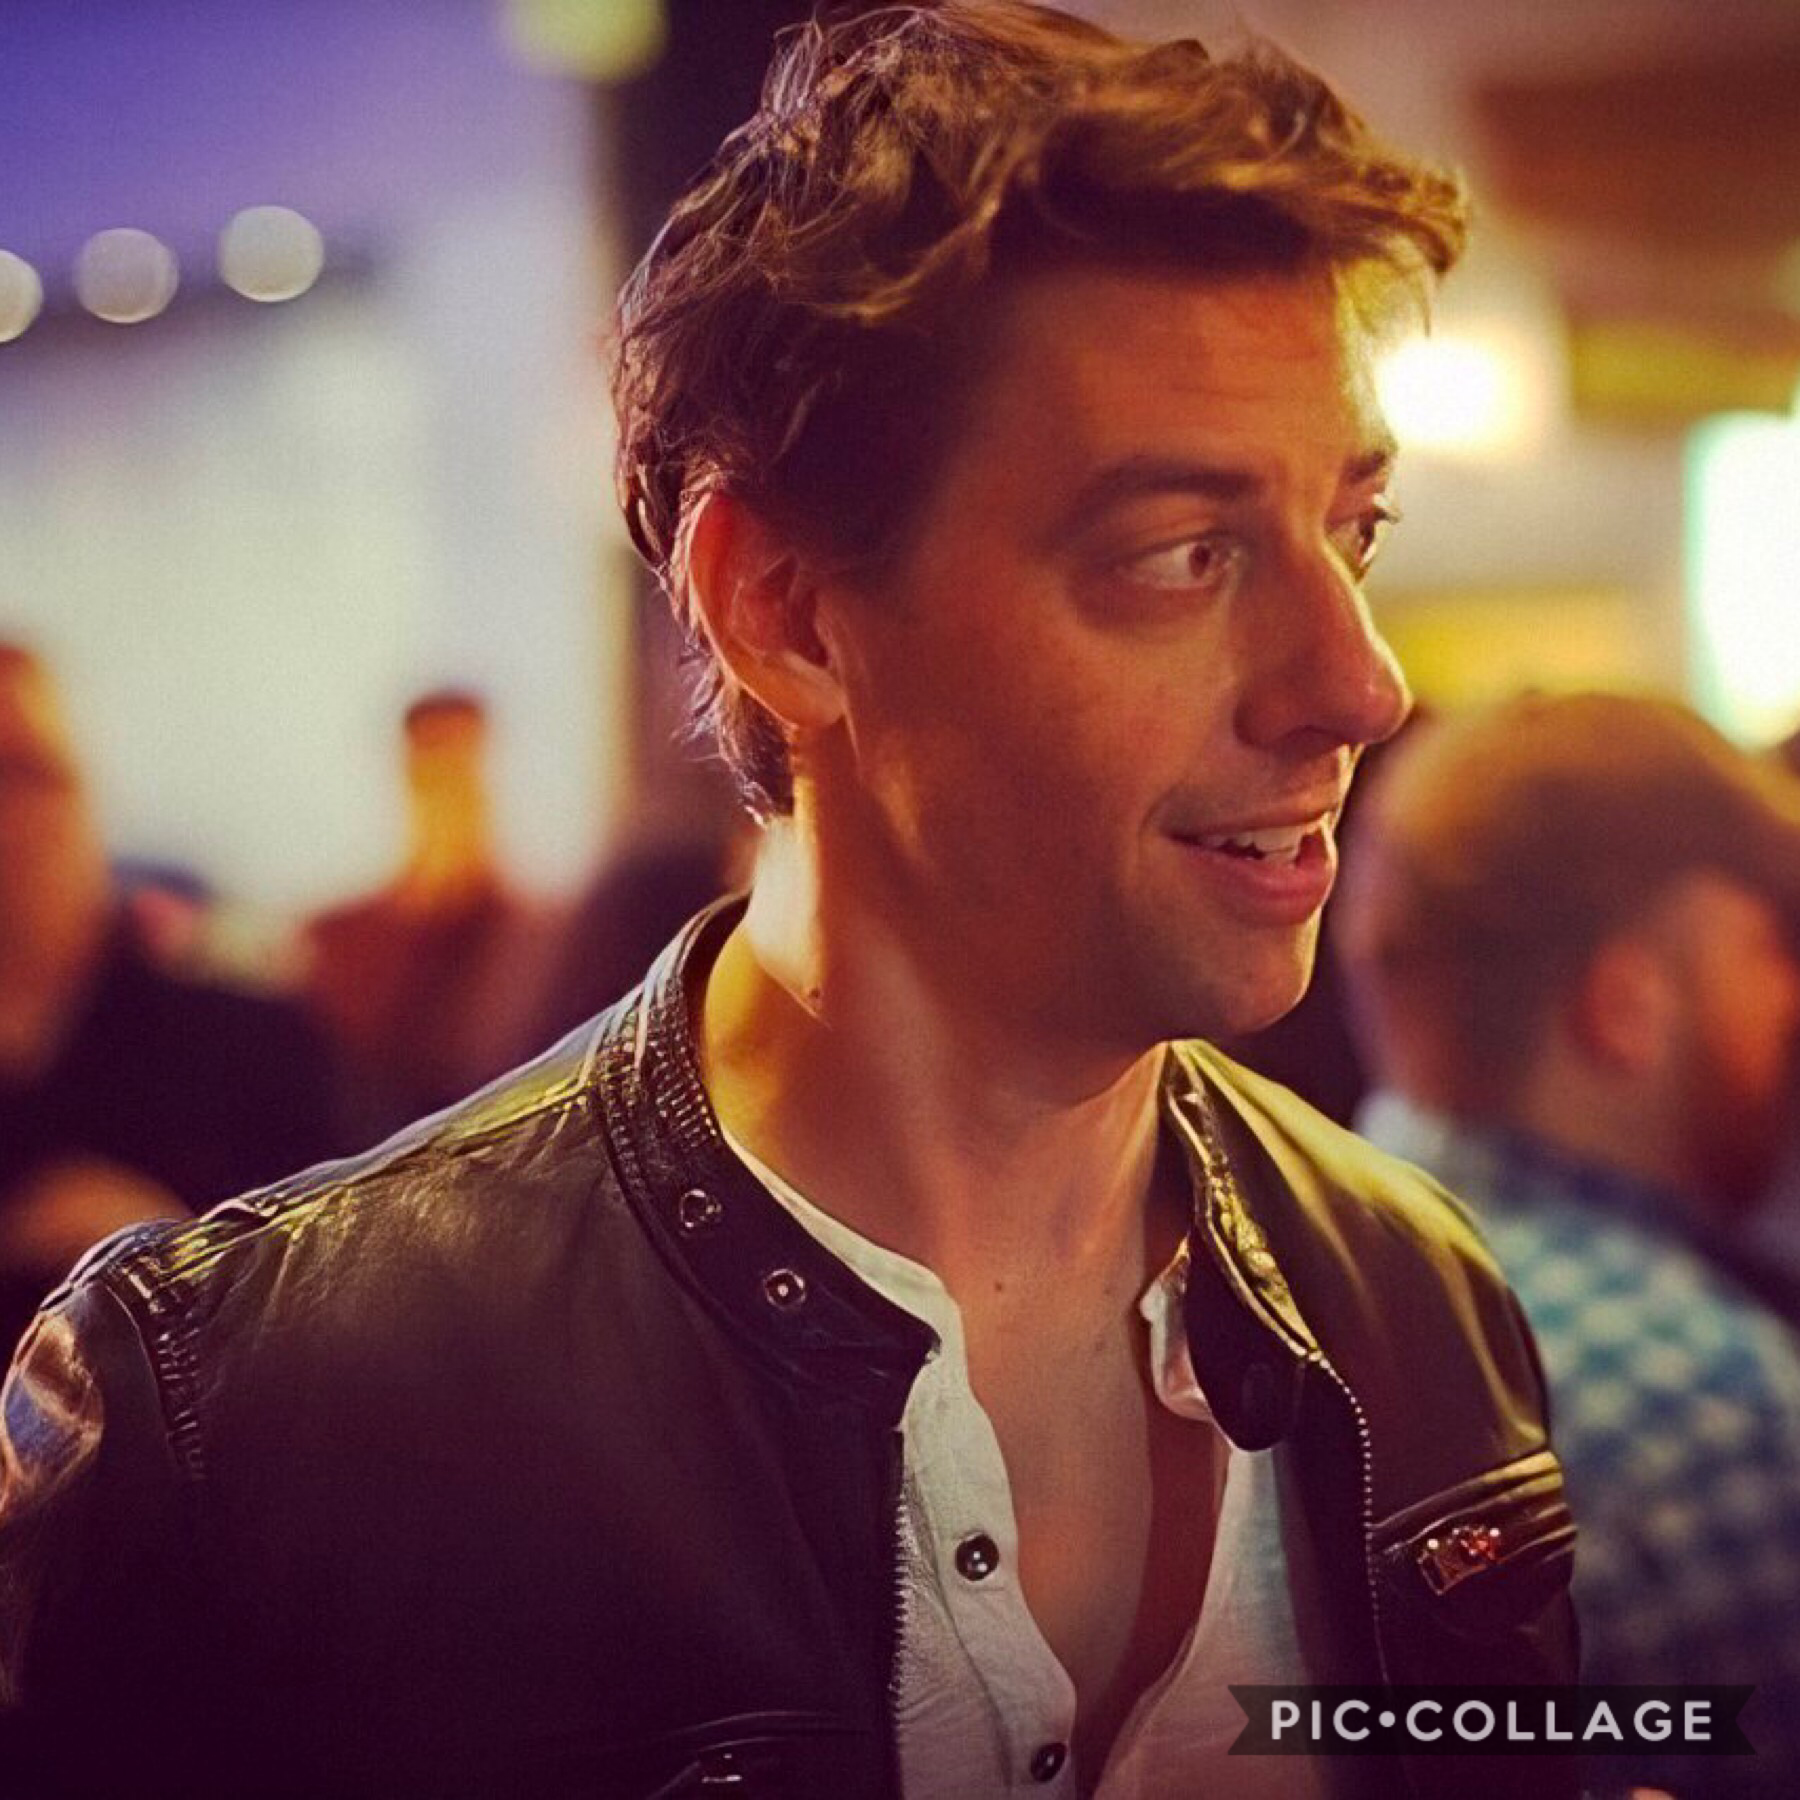 is it okay if i just spam a bunch of photos of my husband Christian borle i have too many i need to get rid of them lol im sorry i know no one knows who he is or cares